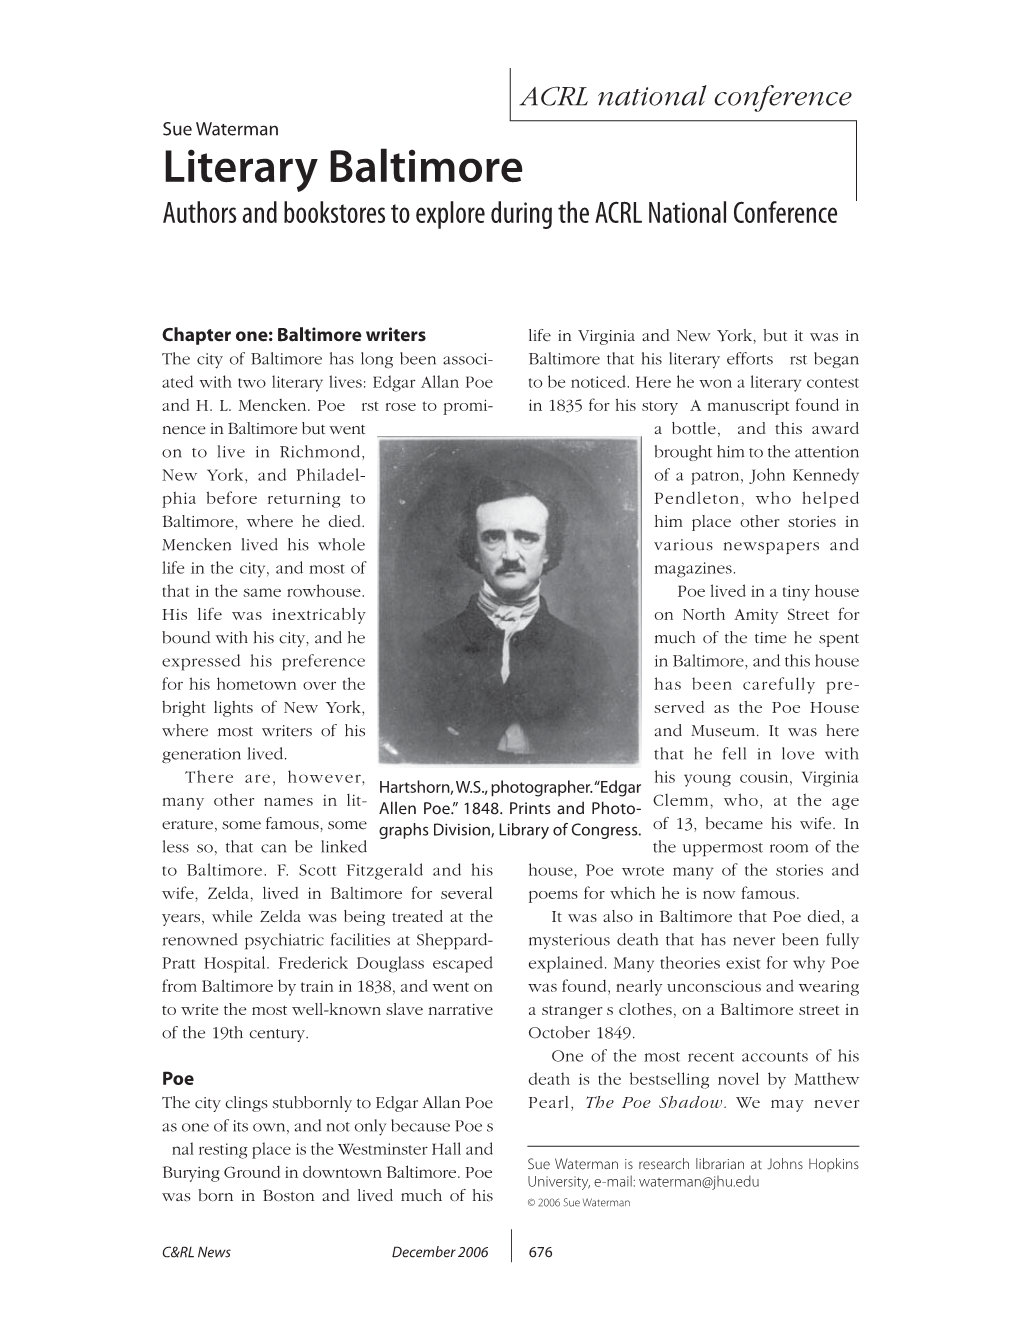 Literary Baltimore Authors and Bookstores to Explore During the ACRL National Conference